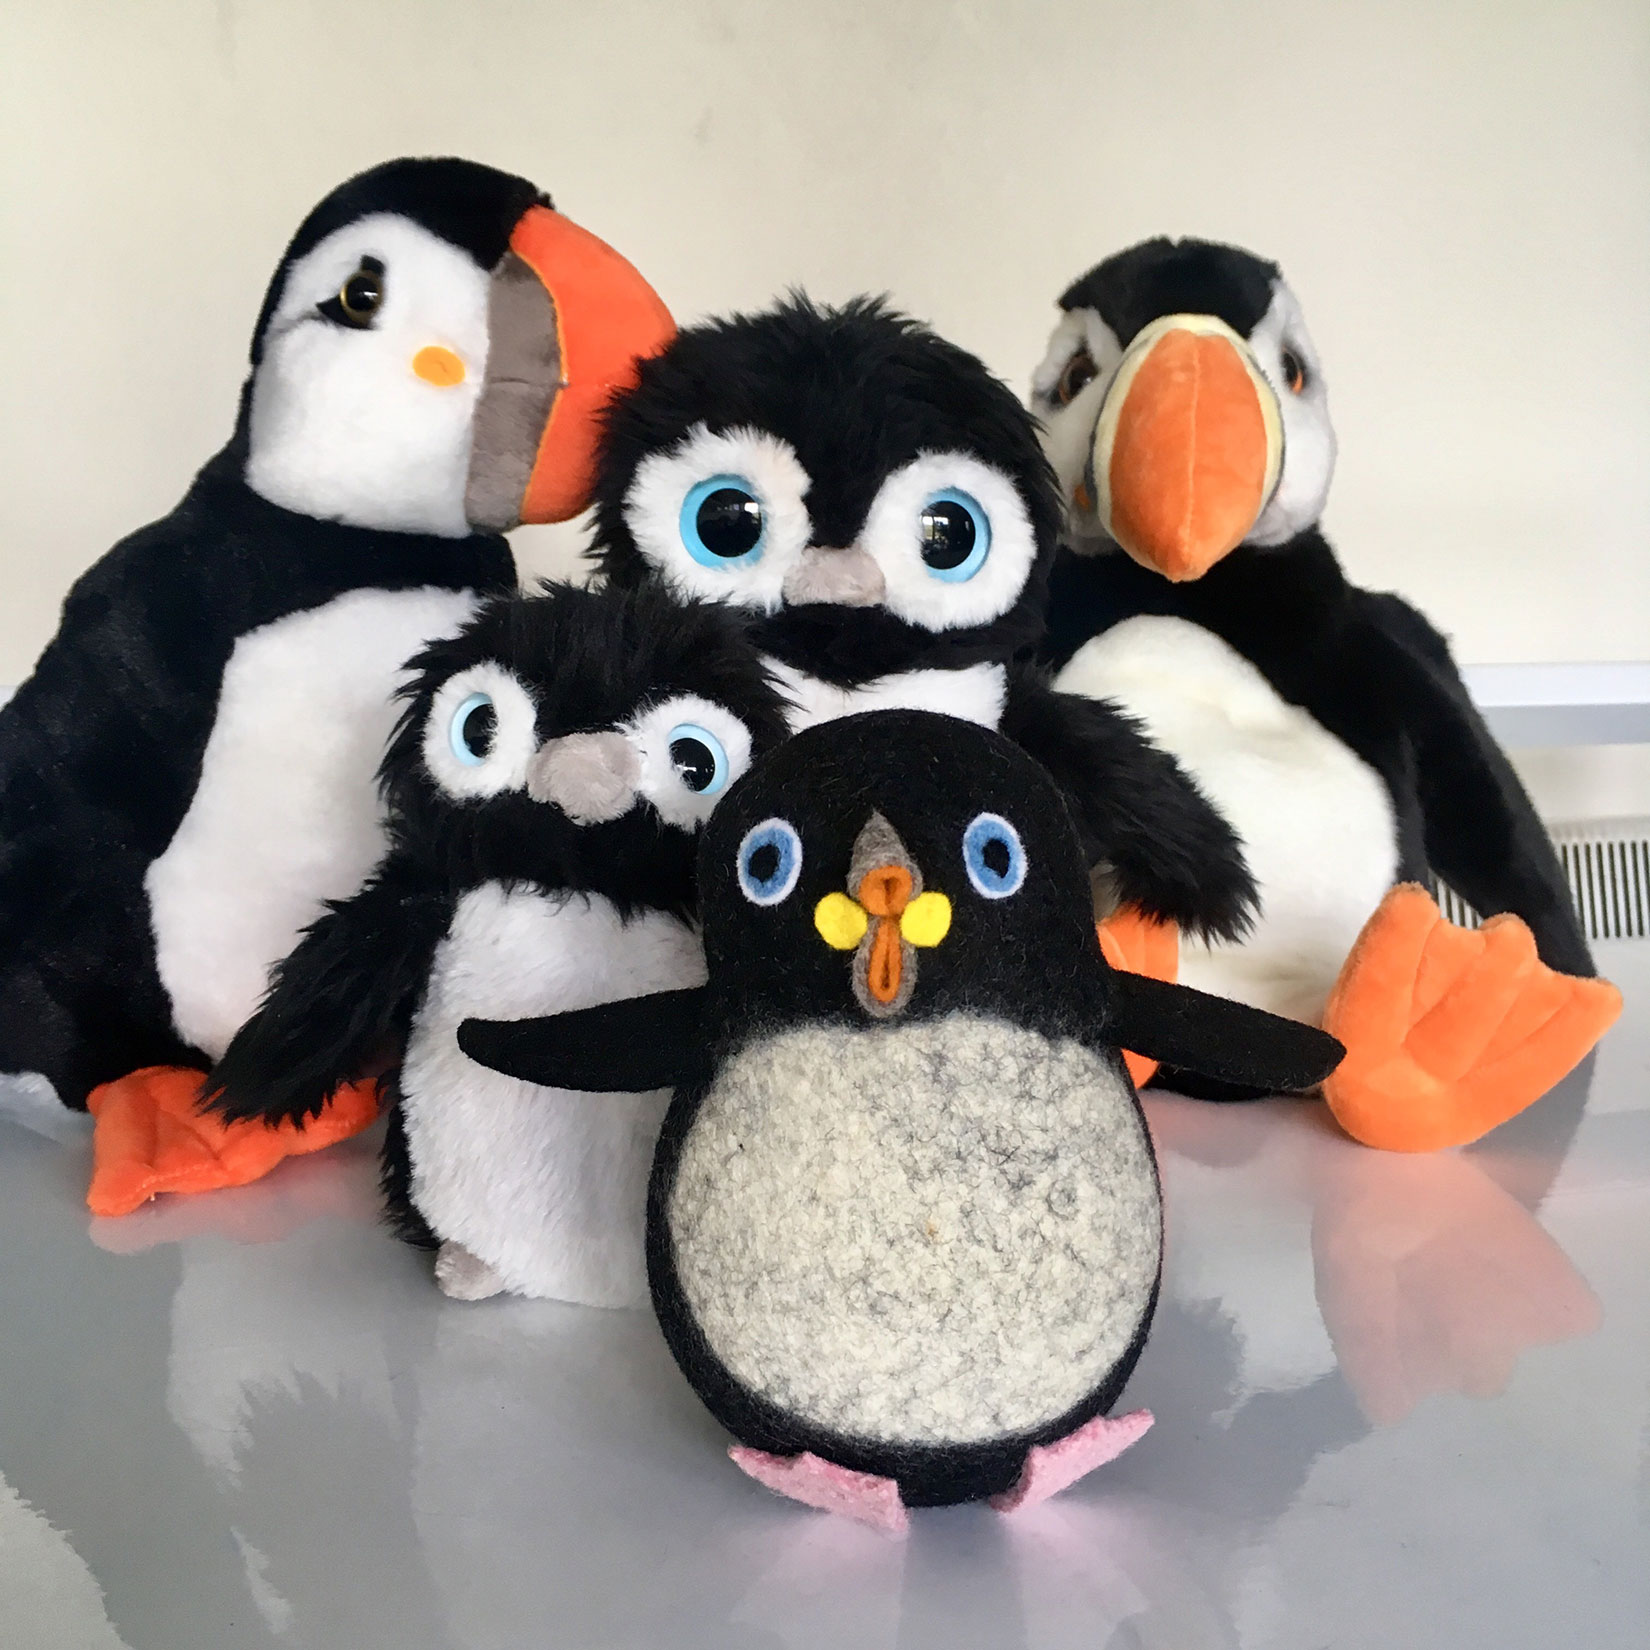 Where are you Puffling collection of Puffins and Pufflings for events